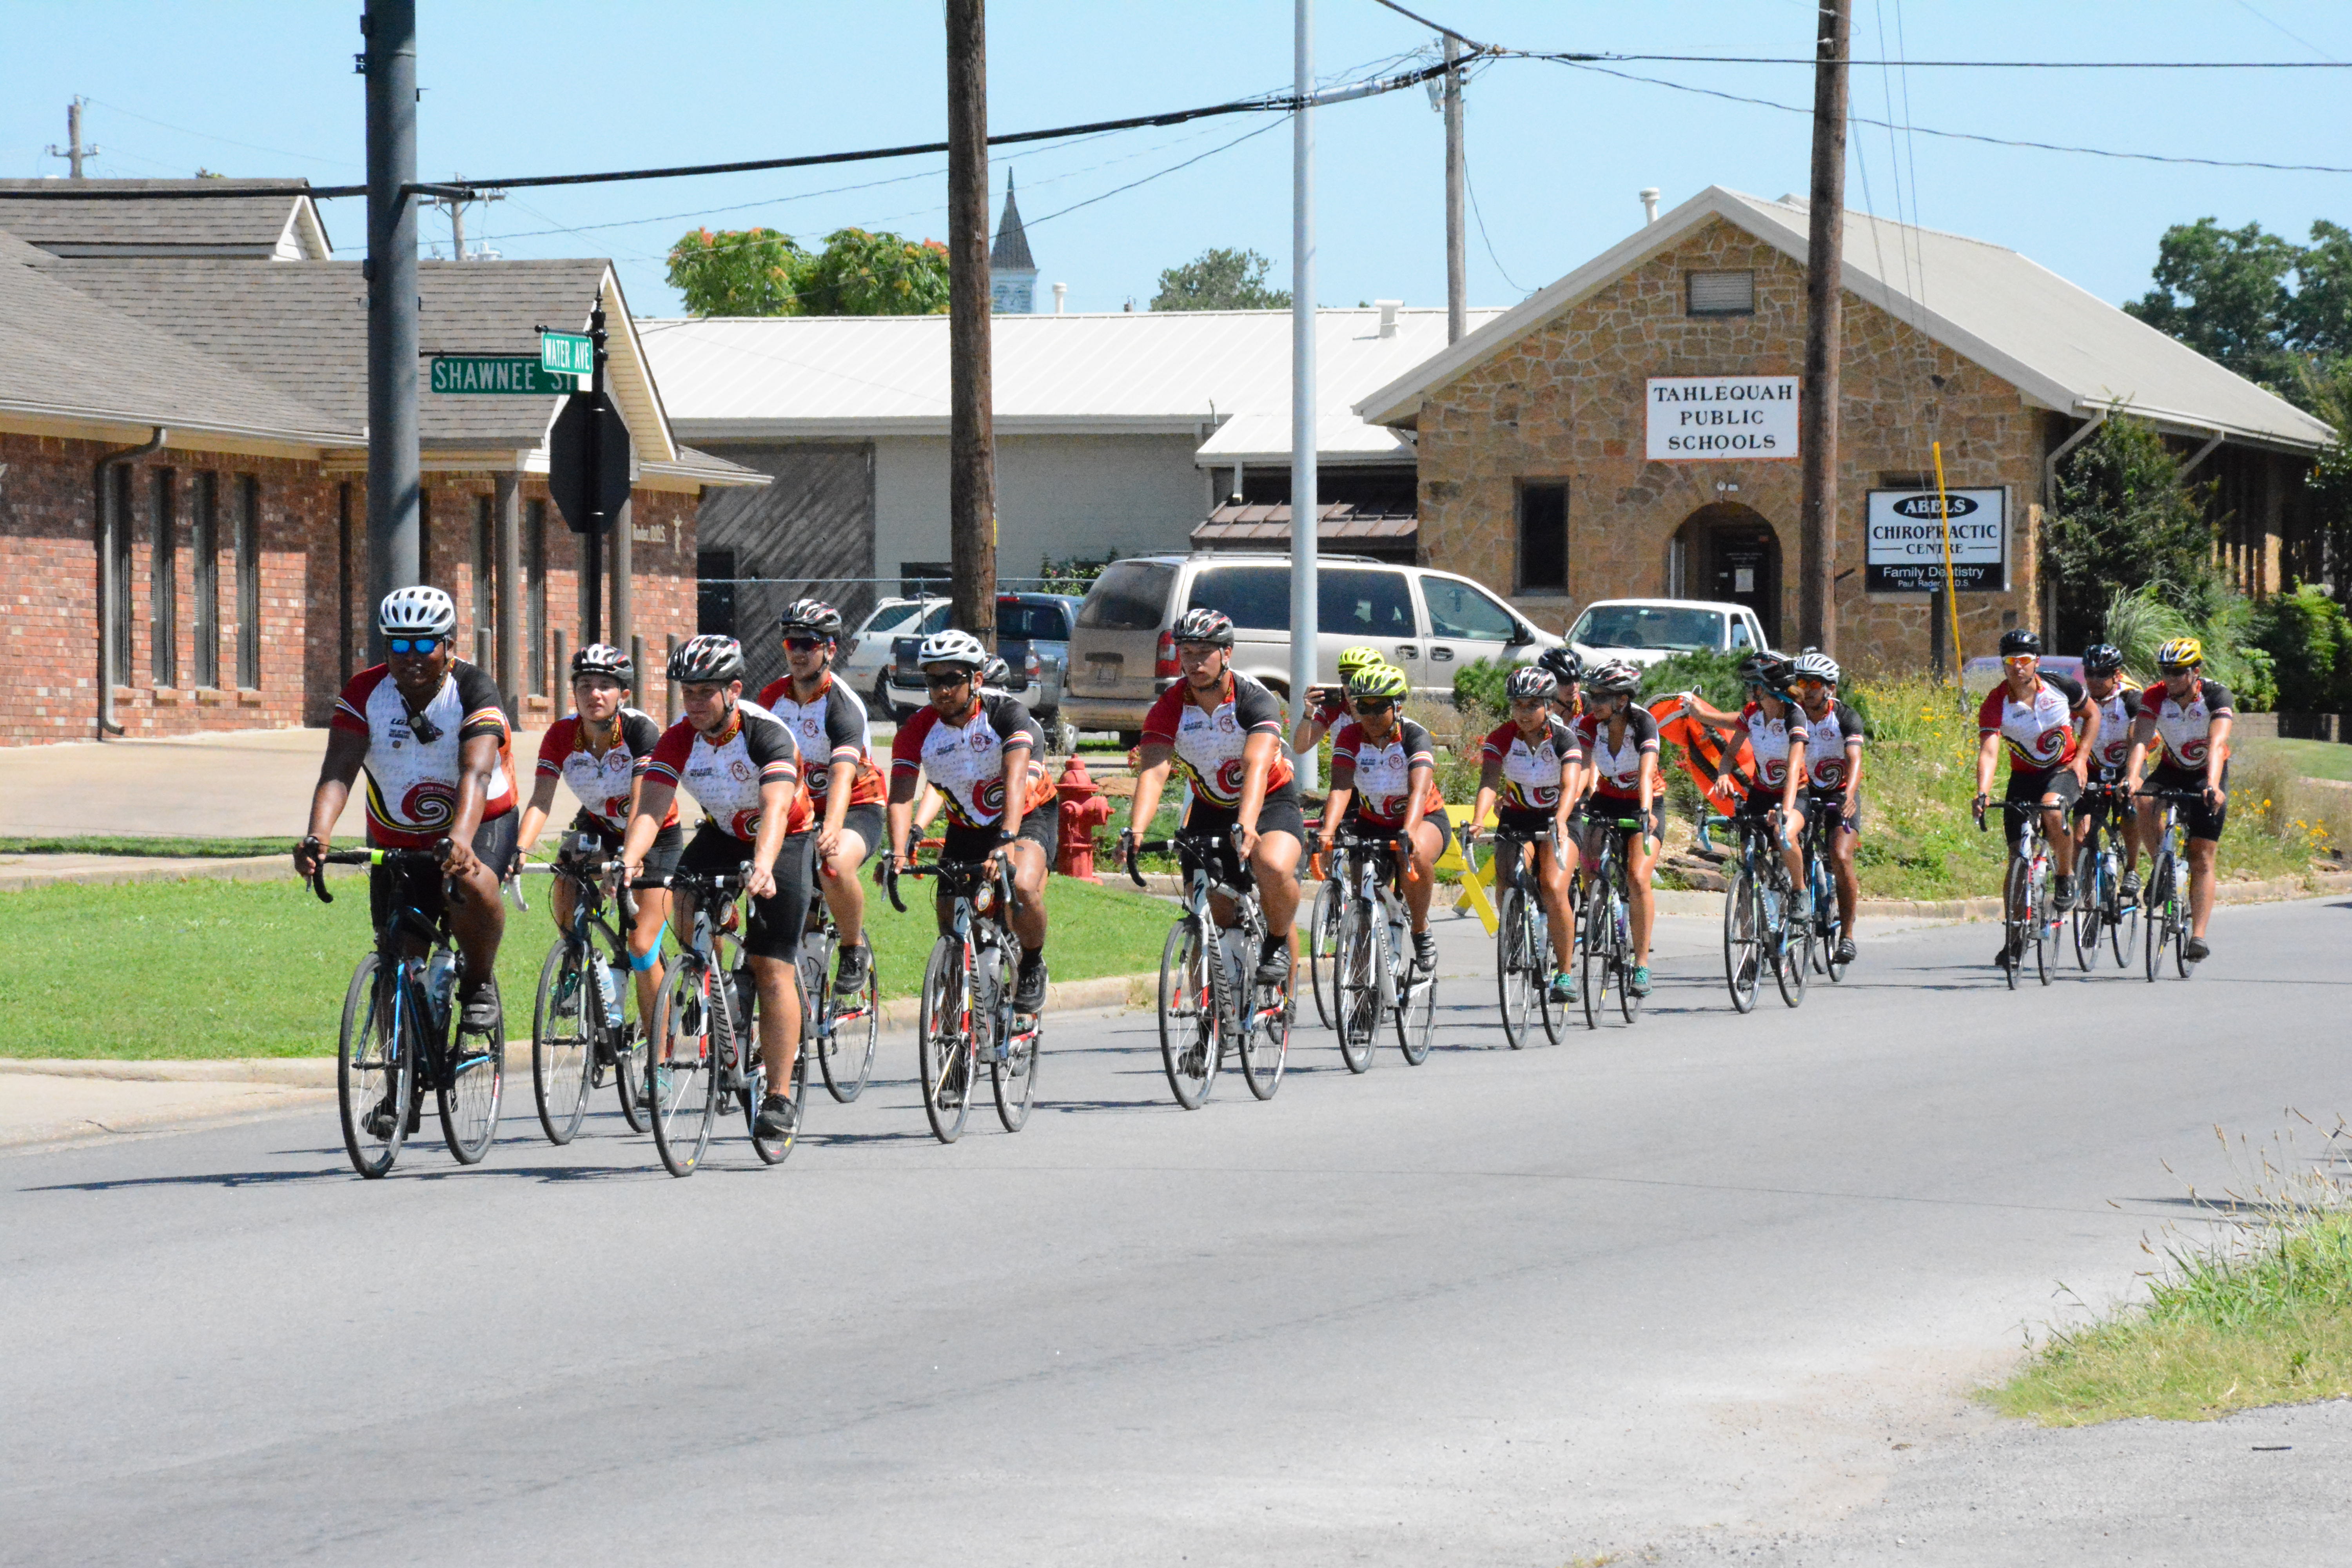 The 2015 Remember the Removal cyclists led by Eastern Band of Cherokee Indians citizen Kevin Tafoya and Cherokee Nation citizen Charles “Billy” Flint returned to Tahlequah Thursday.